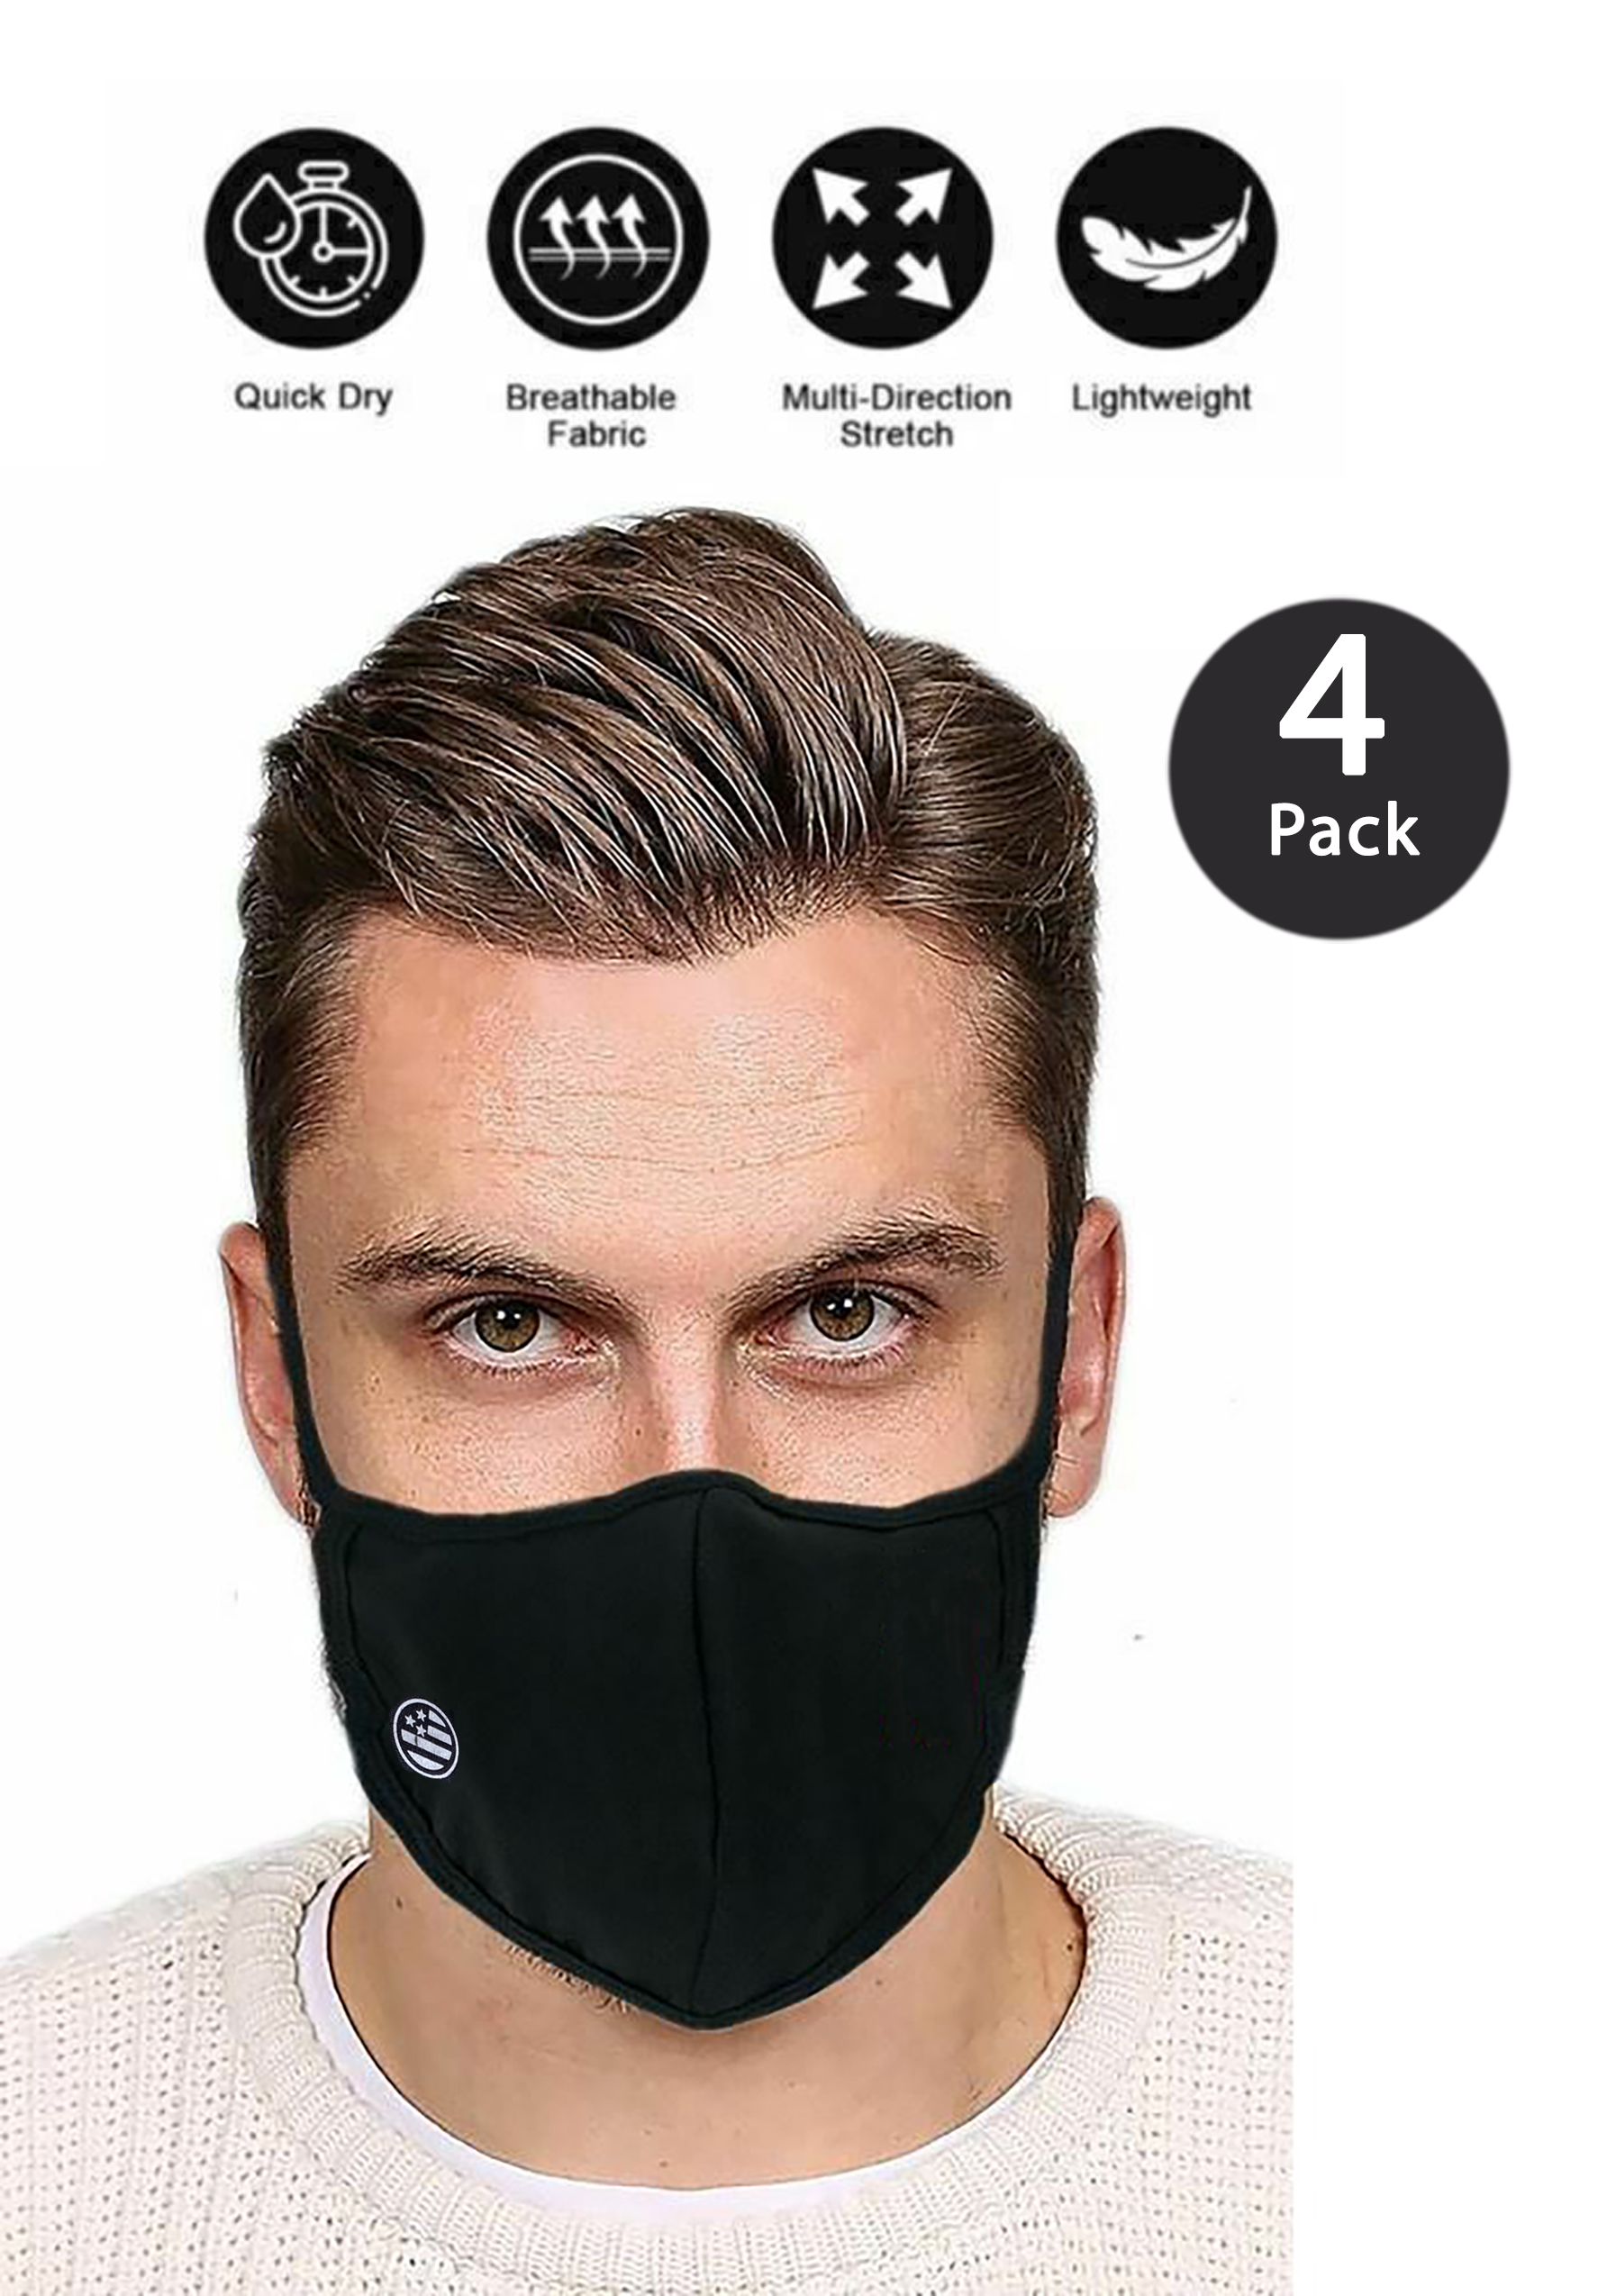 Soft Cotton Reusable Double Layer Washable Covering White Flag Men Women Unisex Black Adult Size Face Cover Mask 4 Pack - image 2 of 4